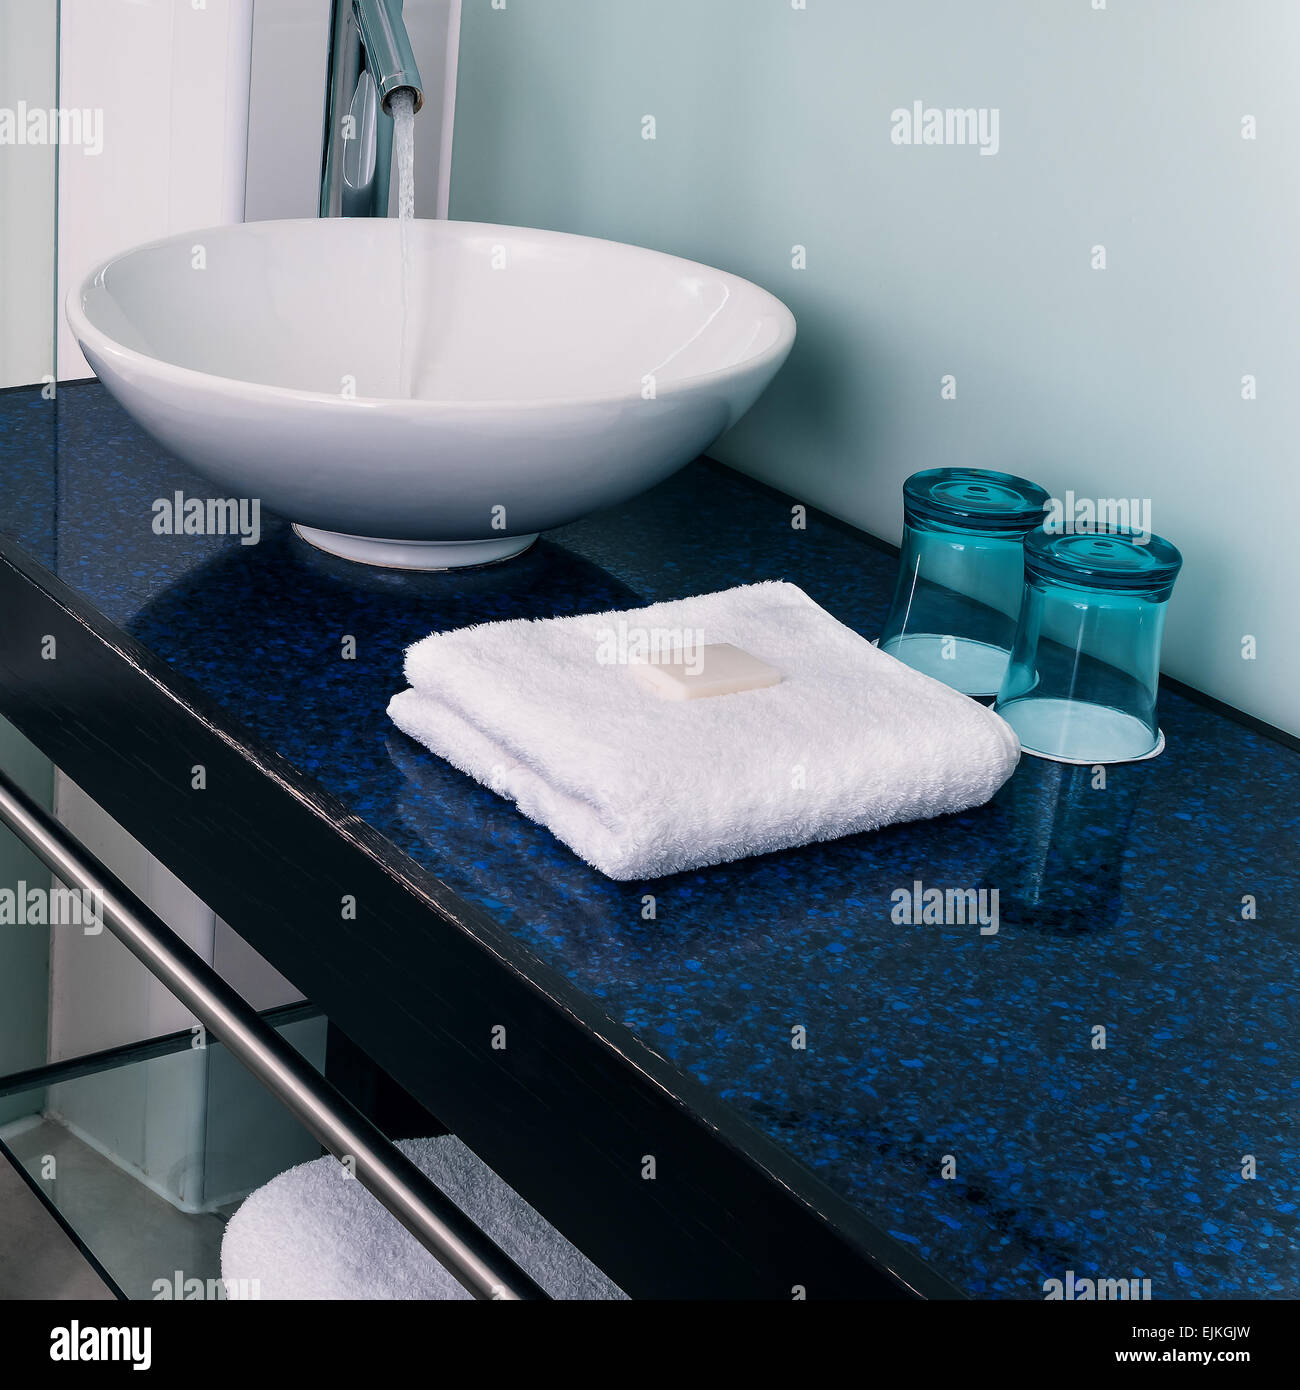 Bathroom sink counter towels water glass blue Stock Photo